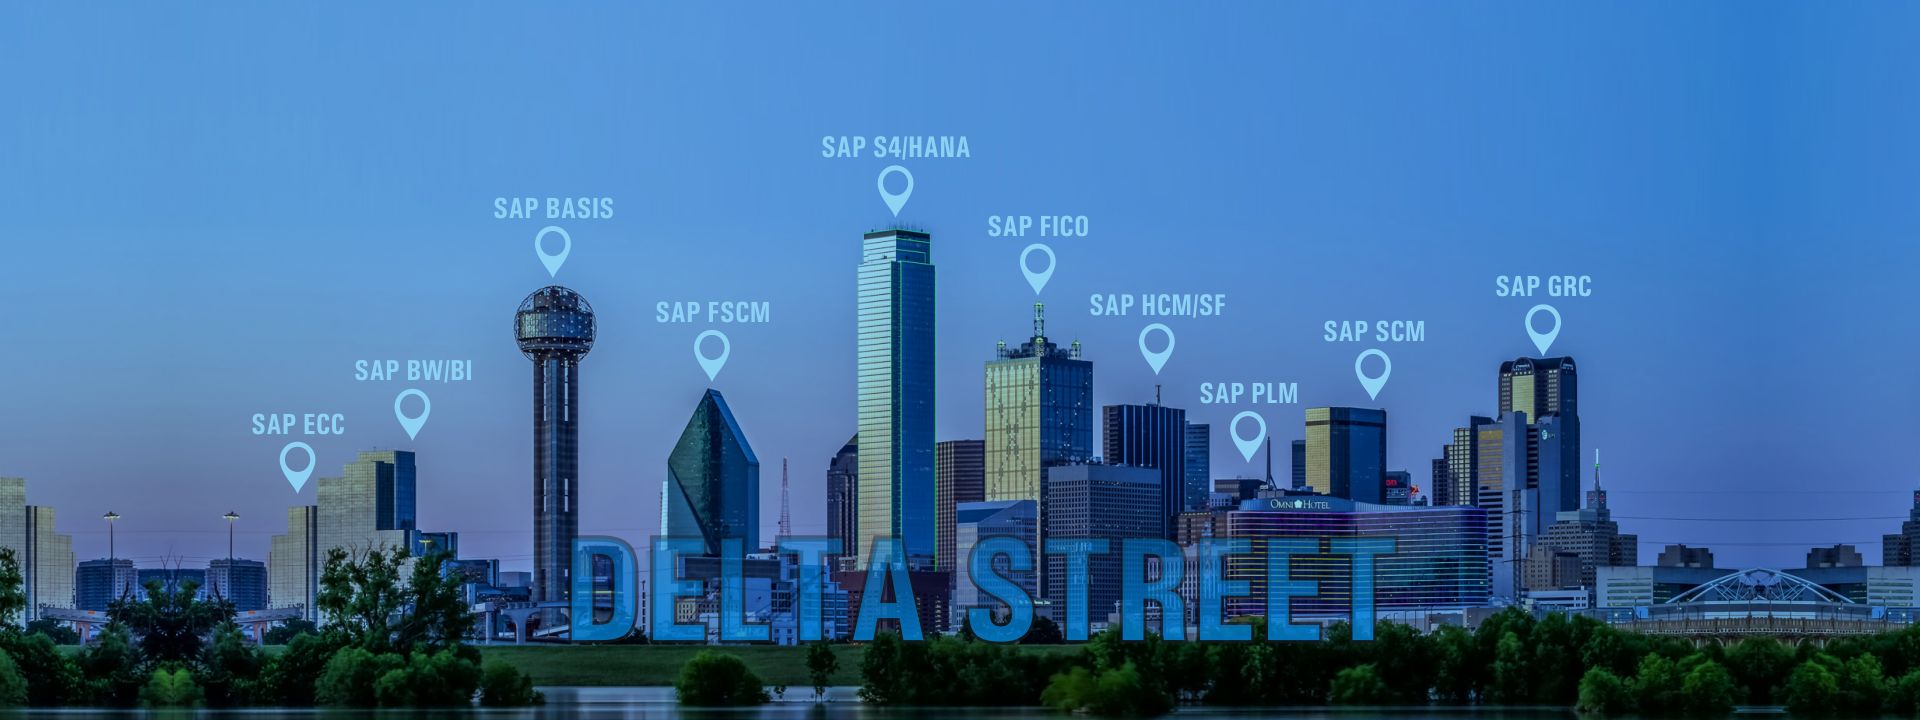 Delta System & Software, Inc - Delta SAP Services, SAP Services USA, SAP services company, SAP services consulting